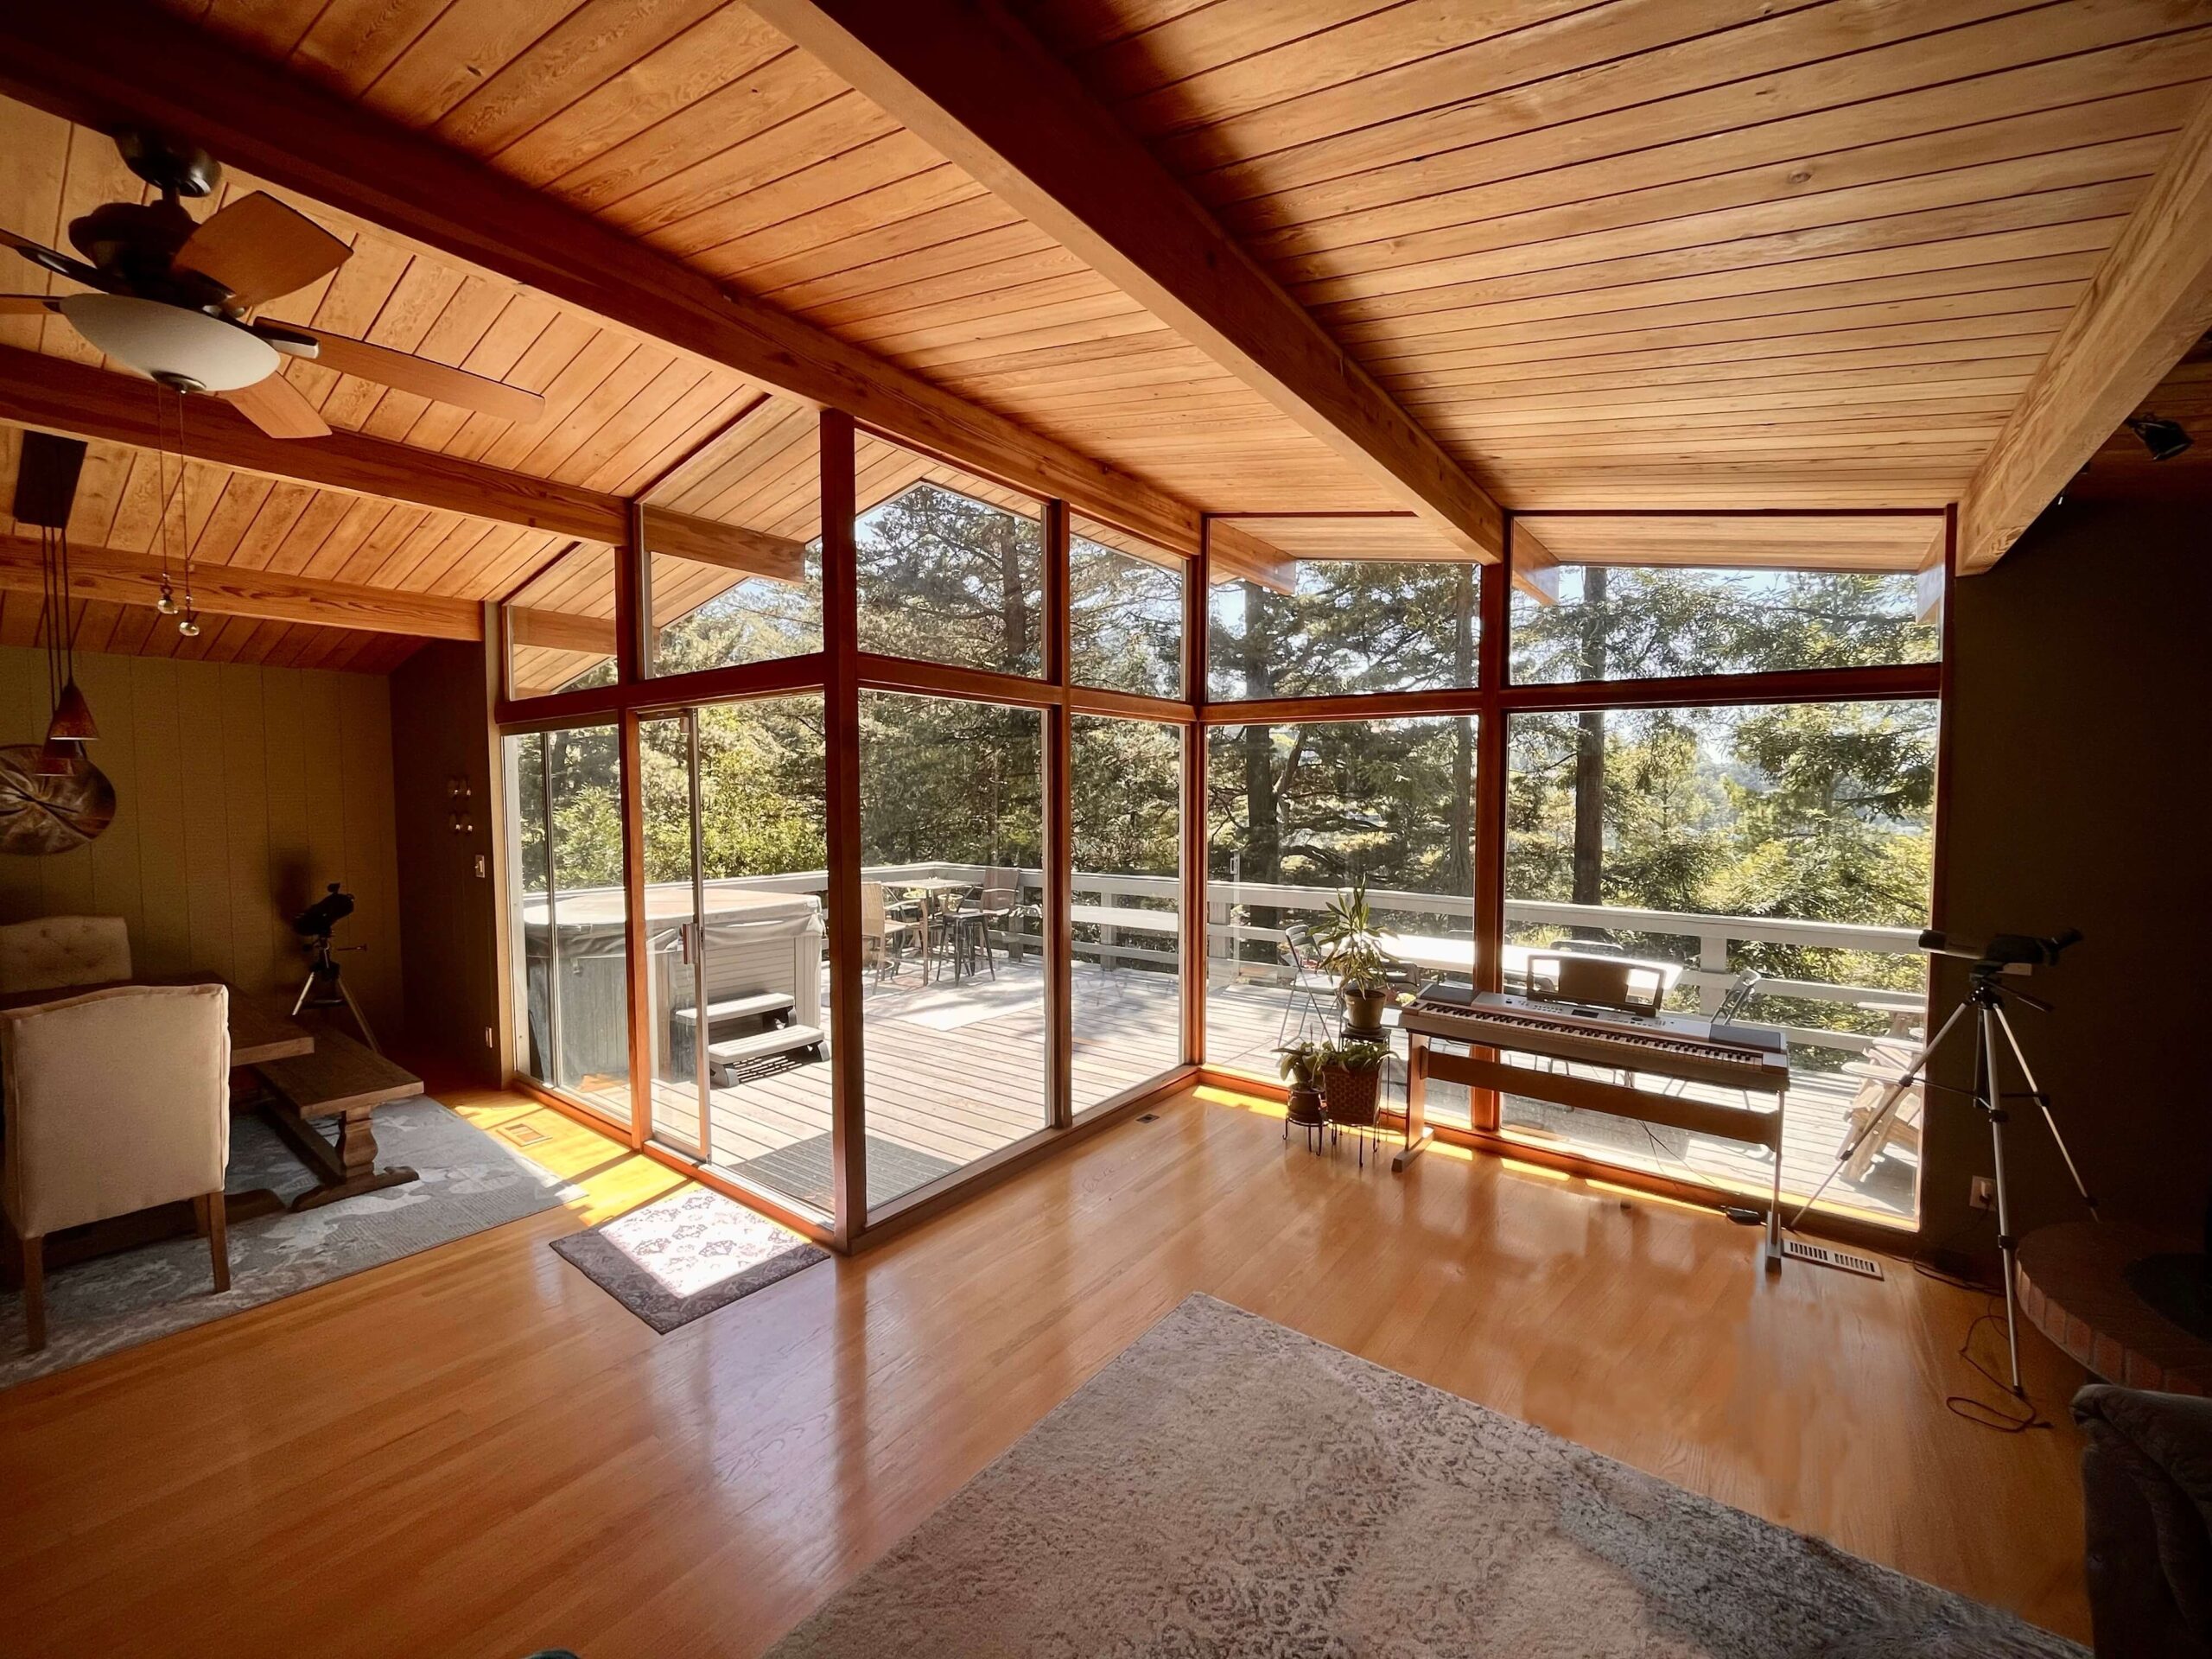 A large wooden interior roof open to a a wall of floor to ceiling glass windows. Outside is a wooden deck surrounded by the canopy of pine trees.